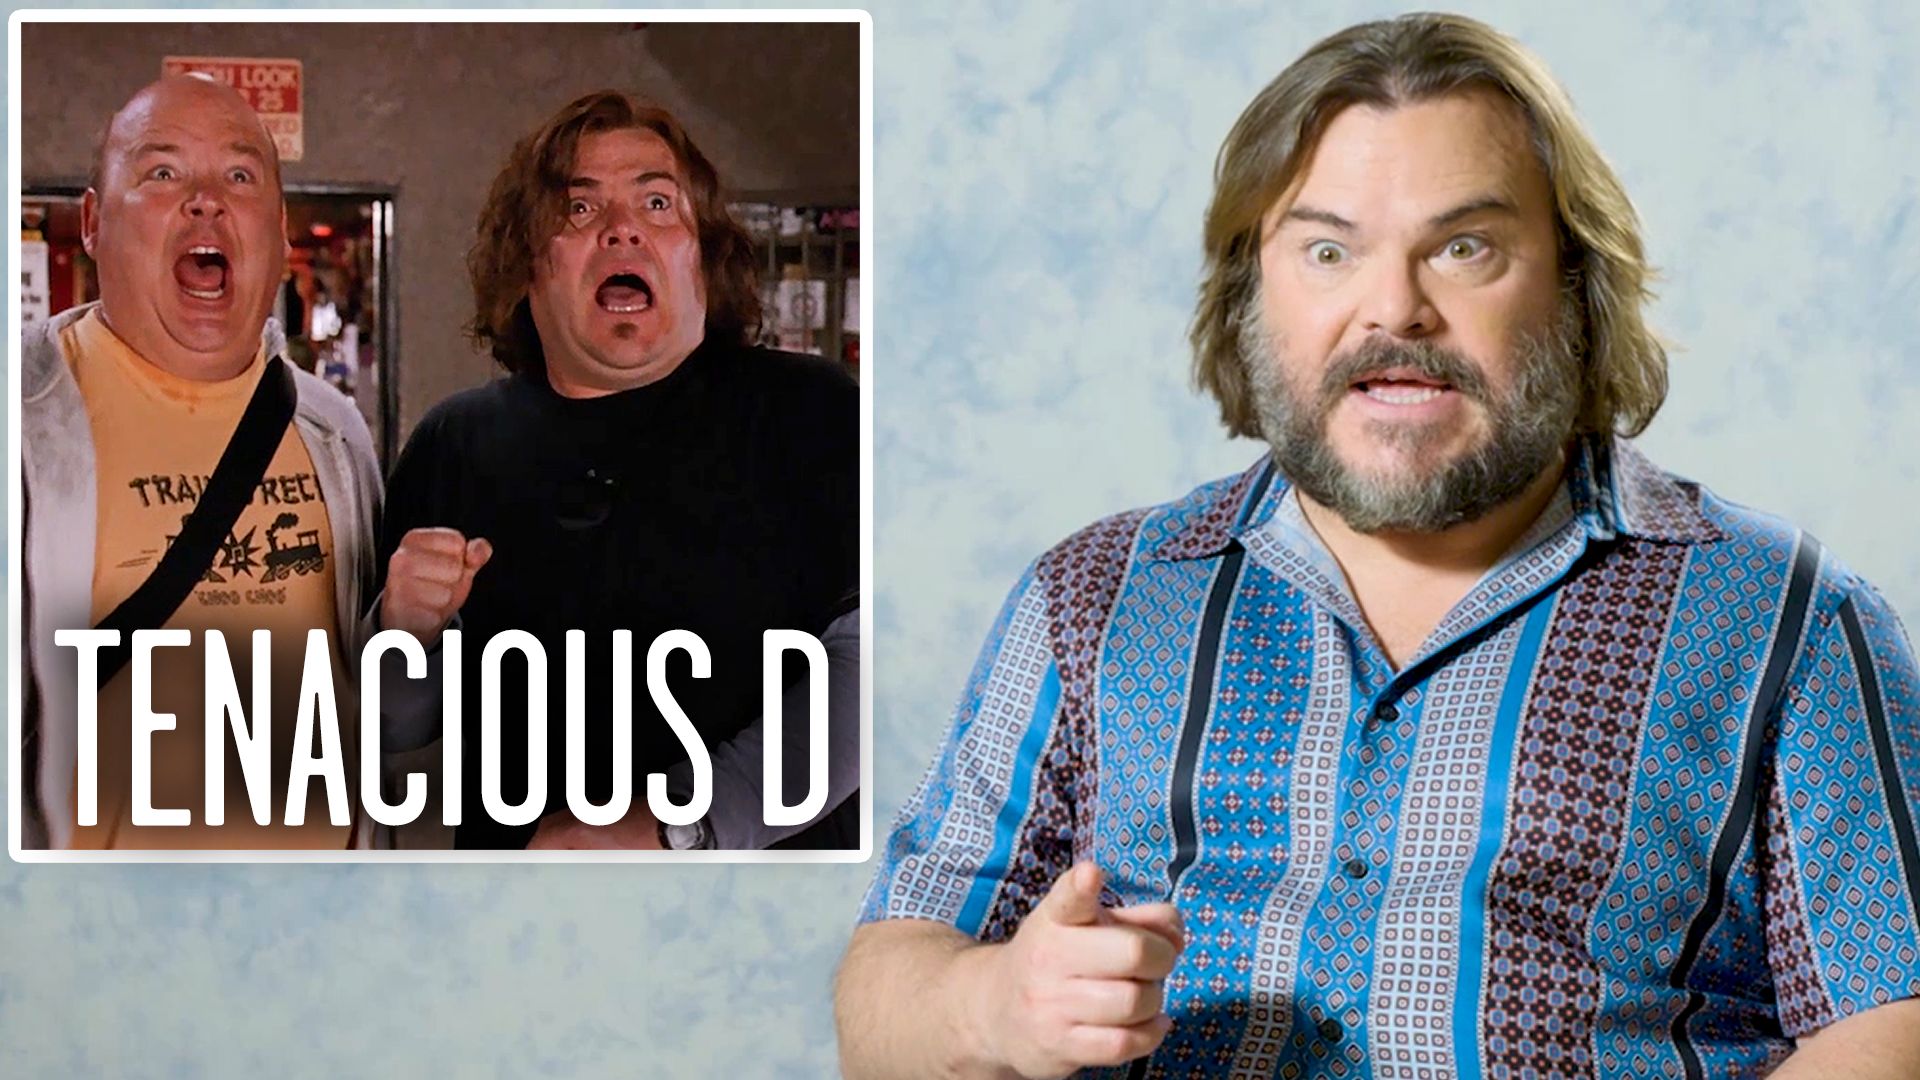 Why Is Everyone Suddenly Thirsting Over Jack Black?